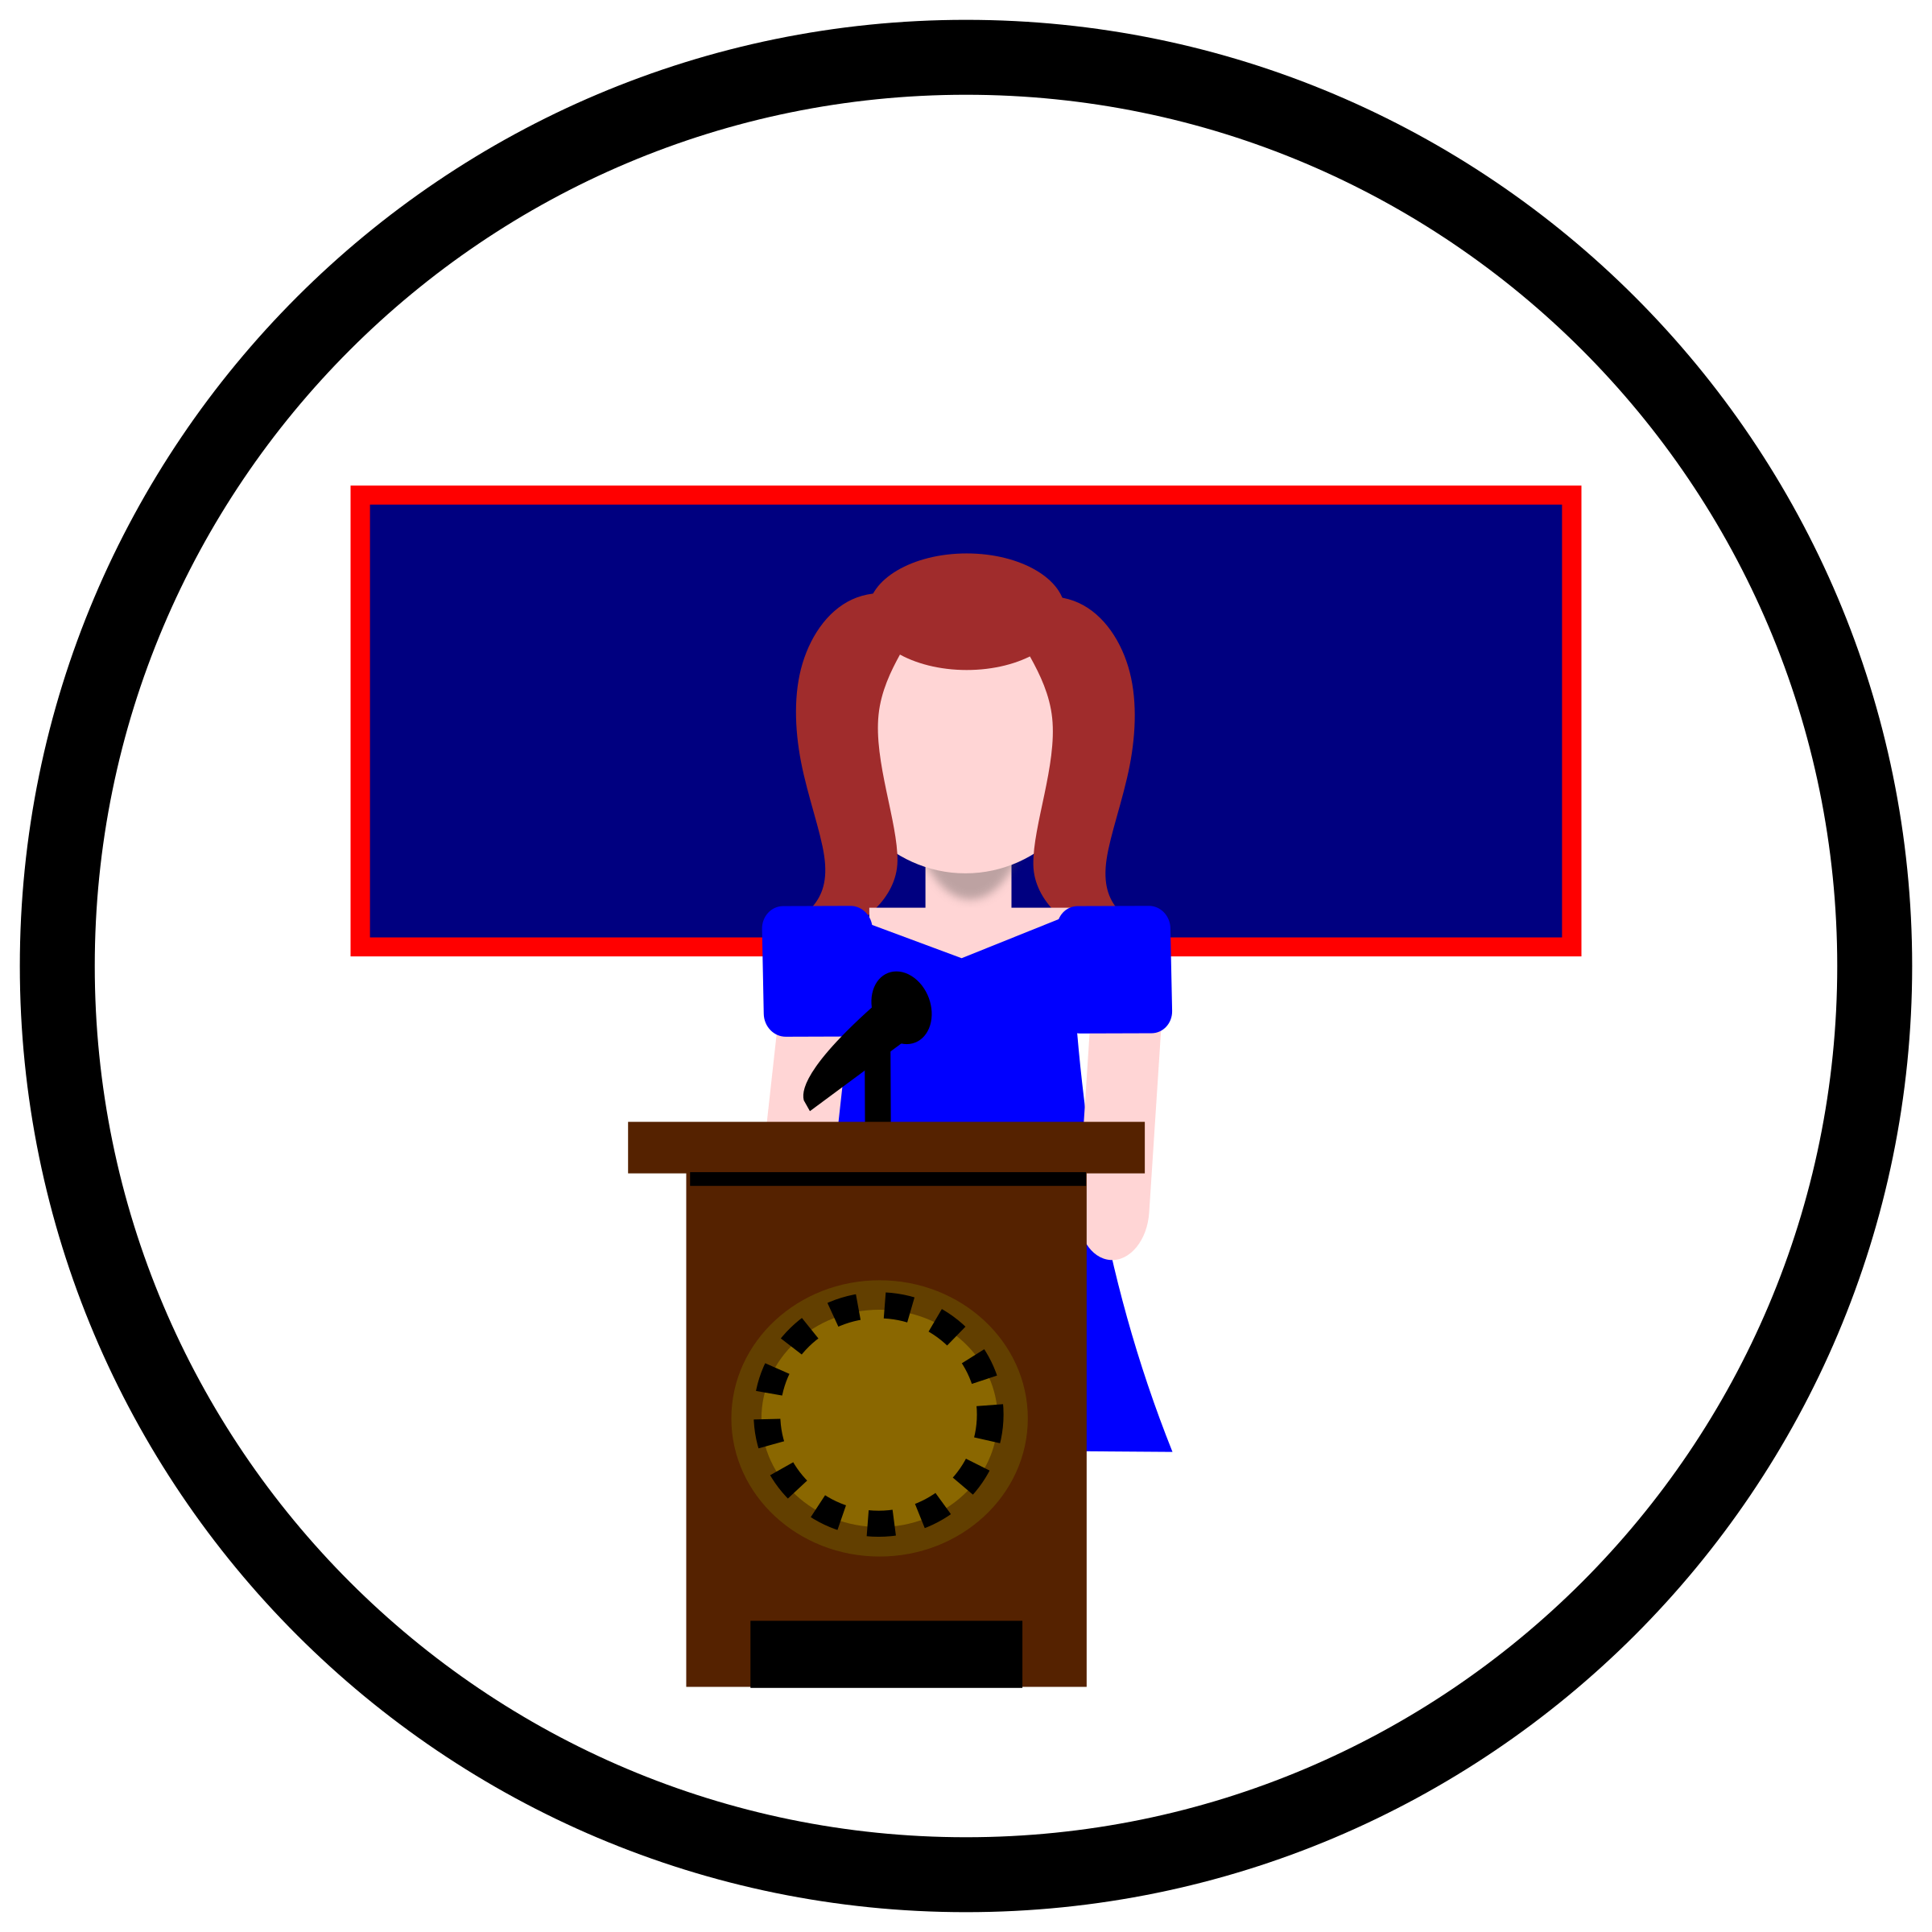 speakers clipart svg